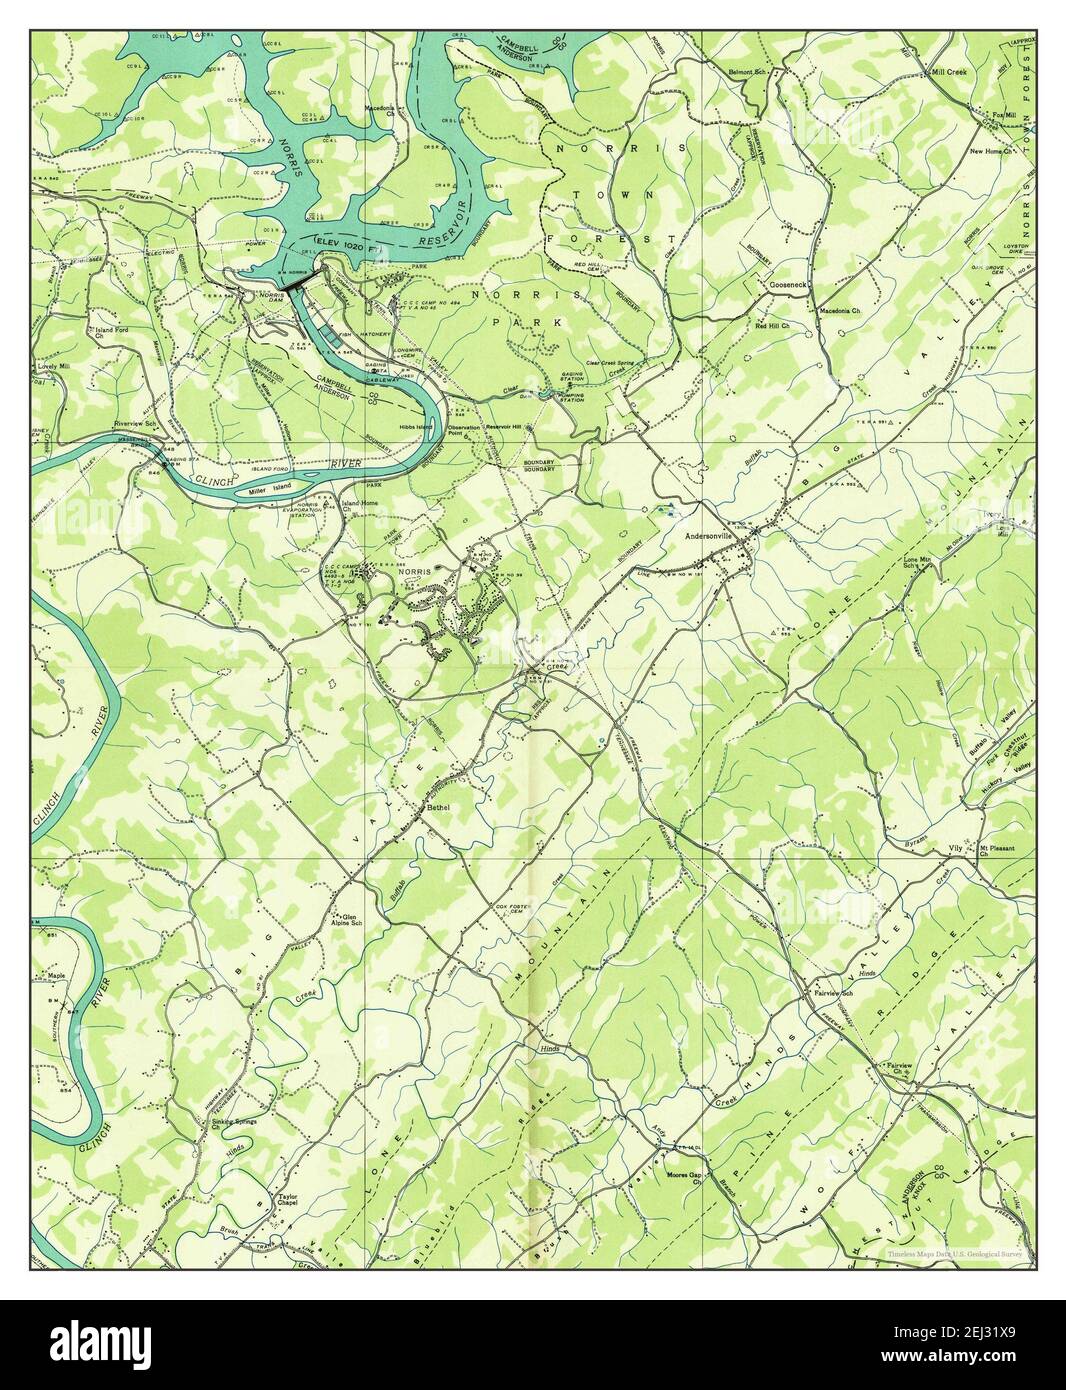 Norris, Tennessee, map 1936, 1:24000, United States of America by Timeless Maps, data U.S. Geological Survey Stock Photo